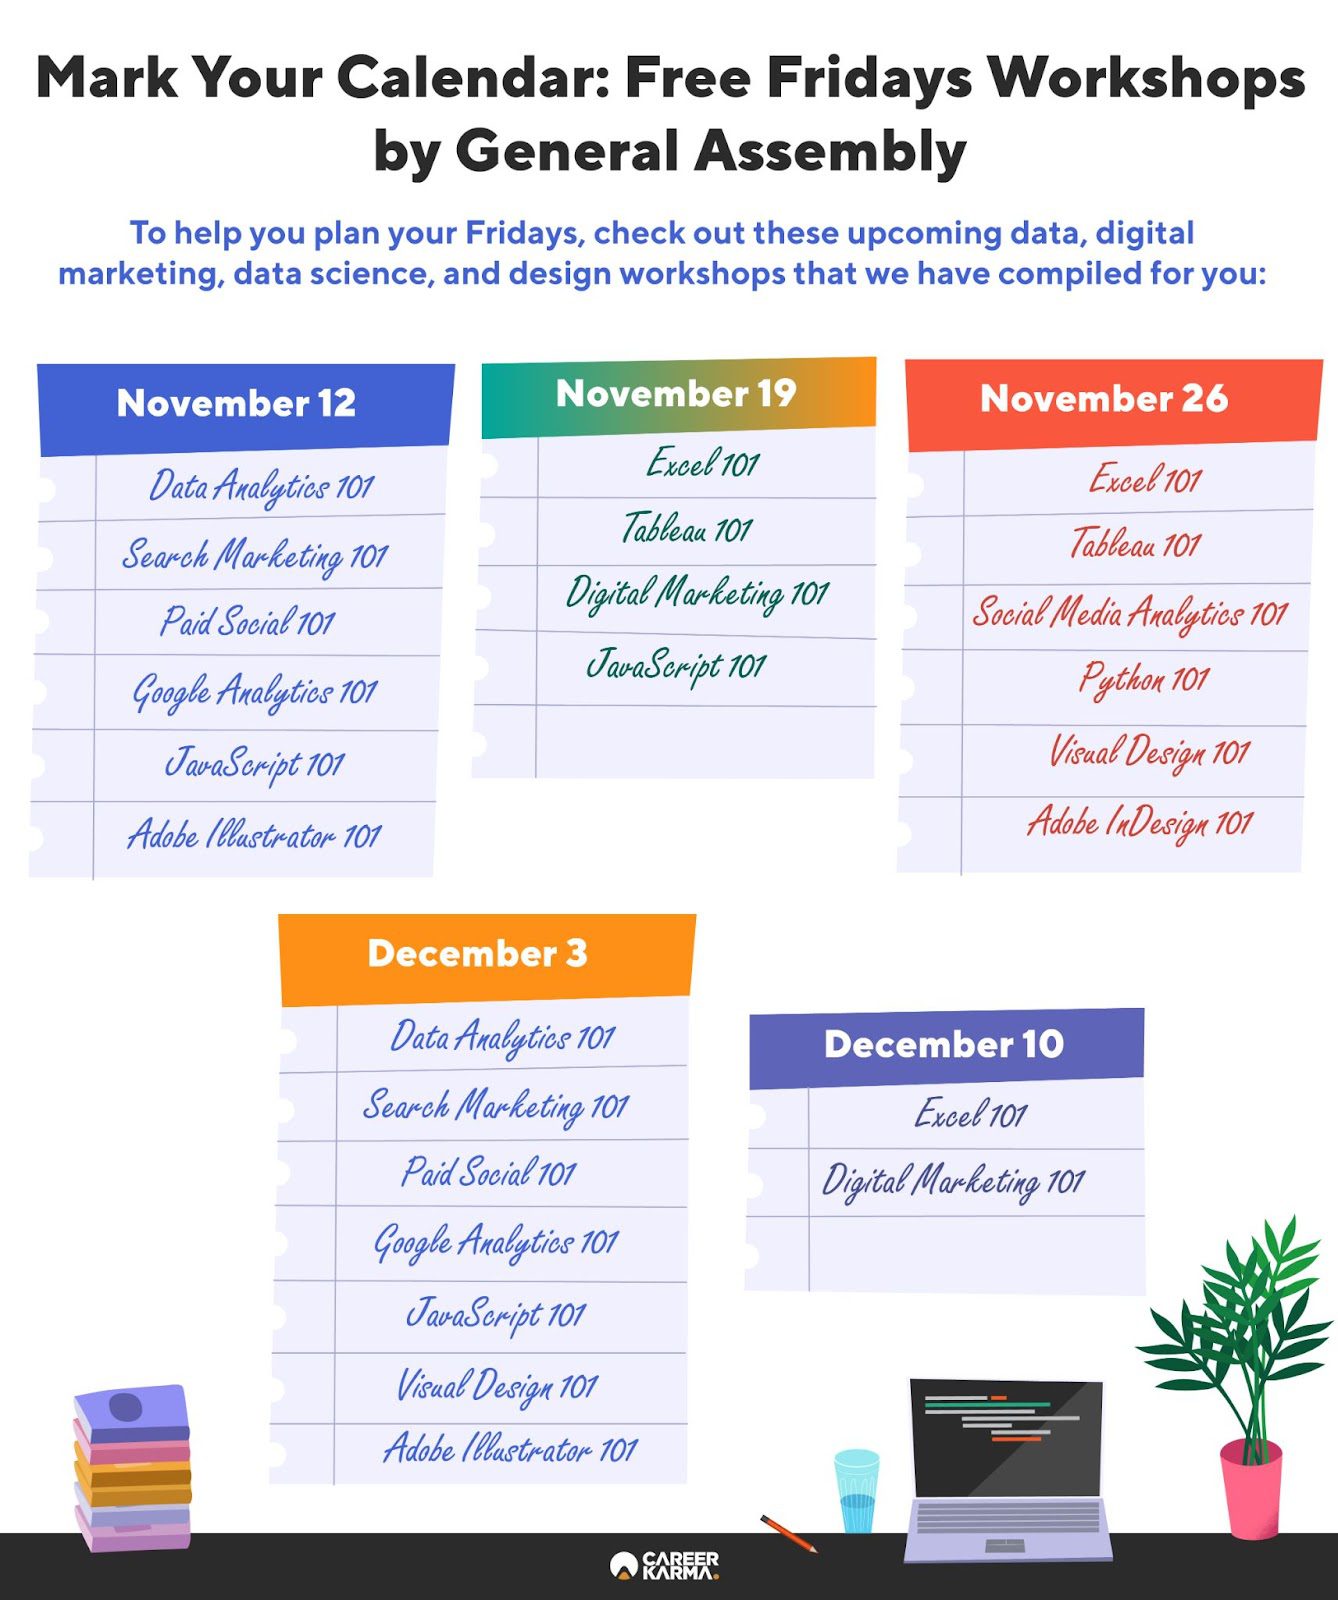 Infographics showing upcoming Free Fridays workshops by General Assembly